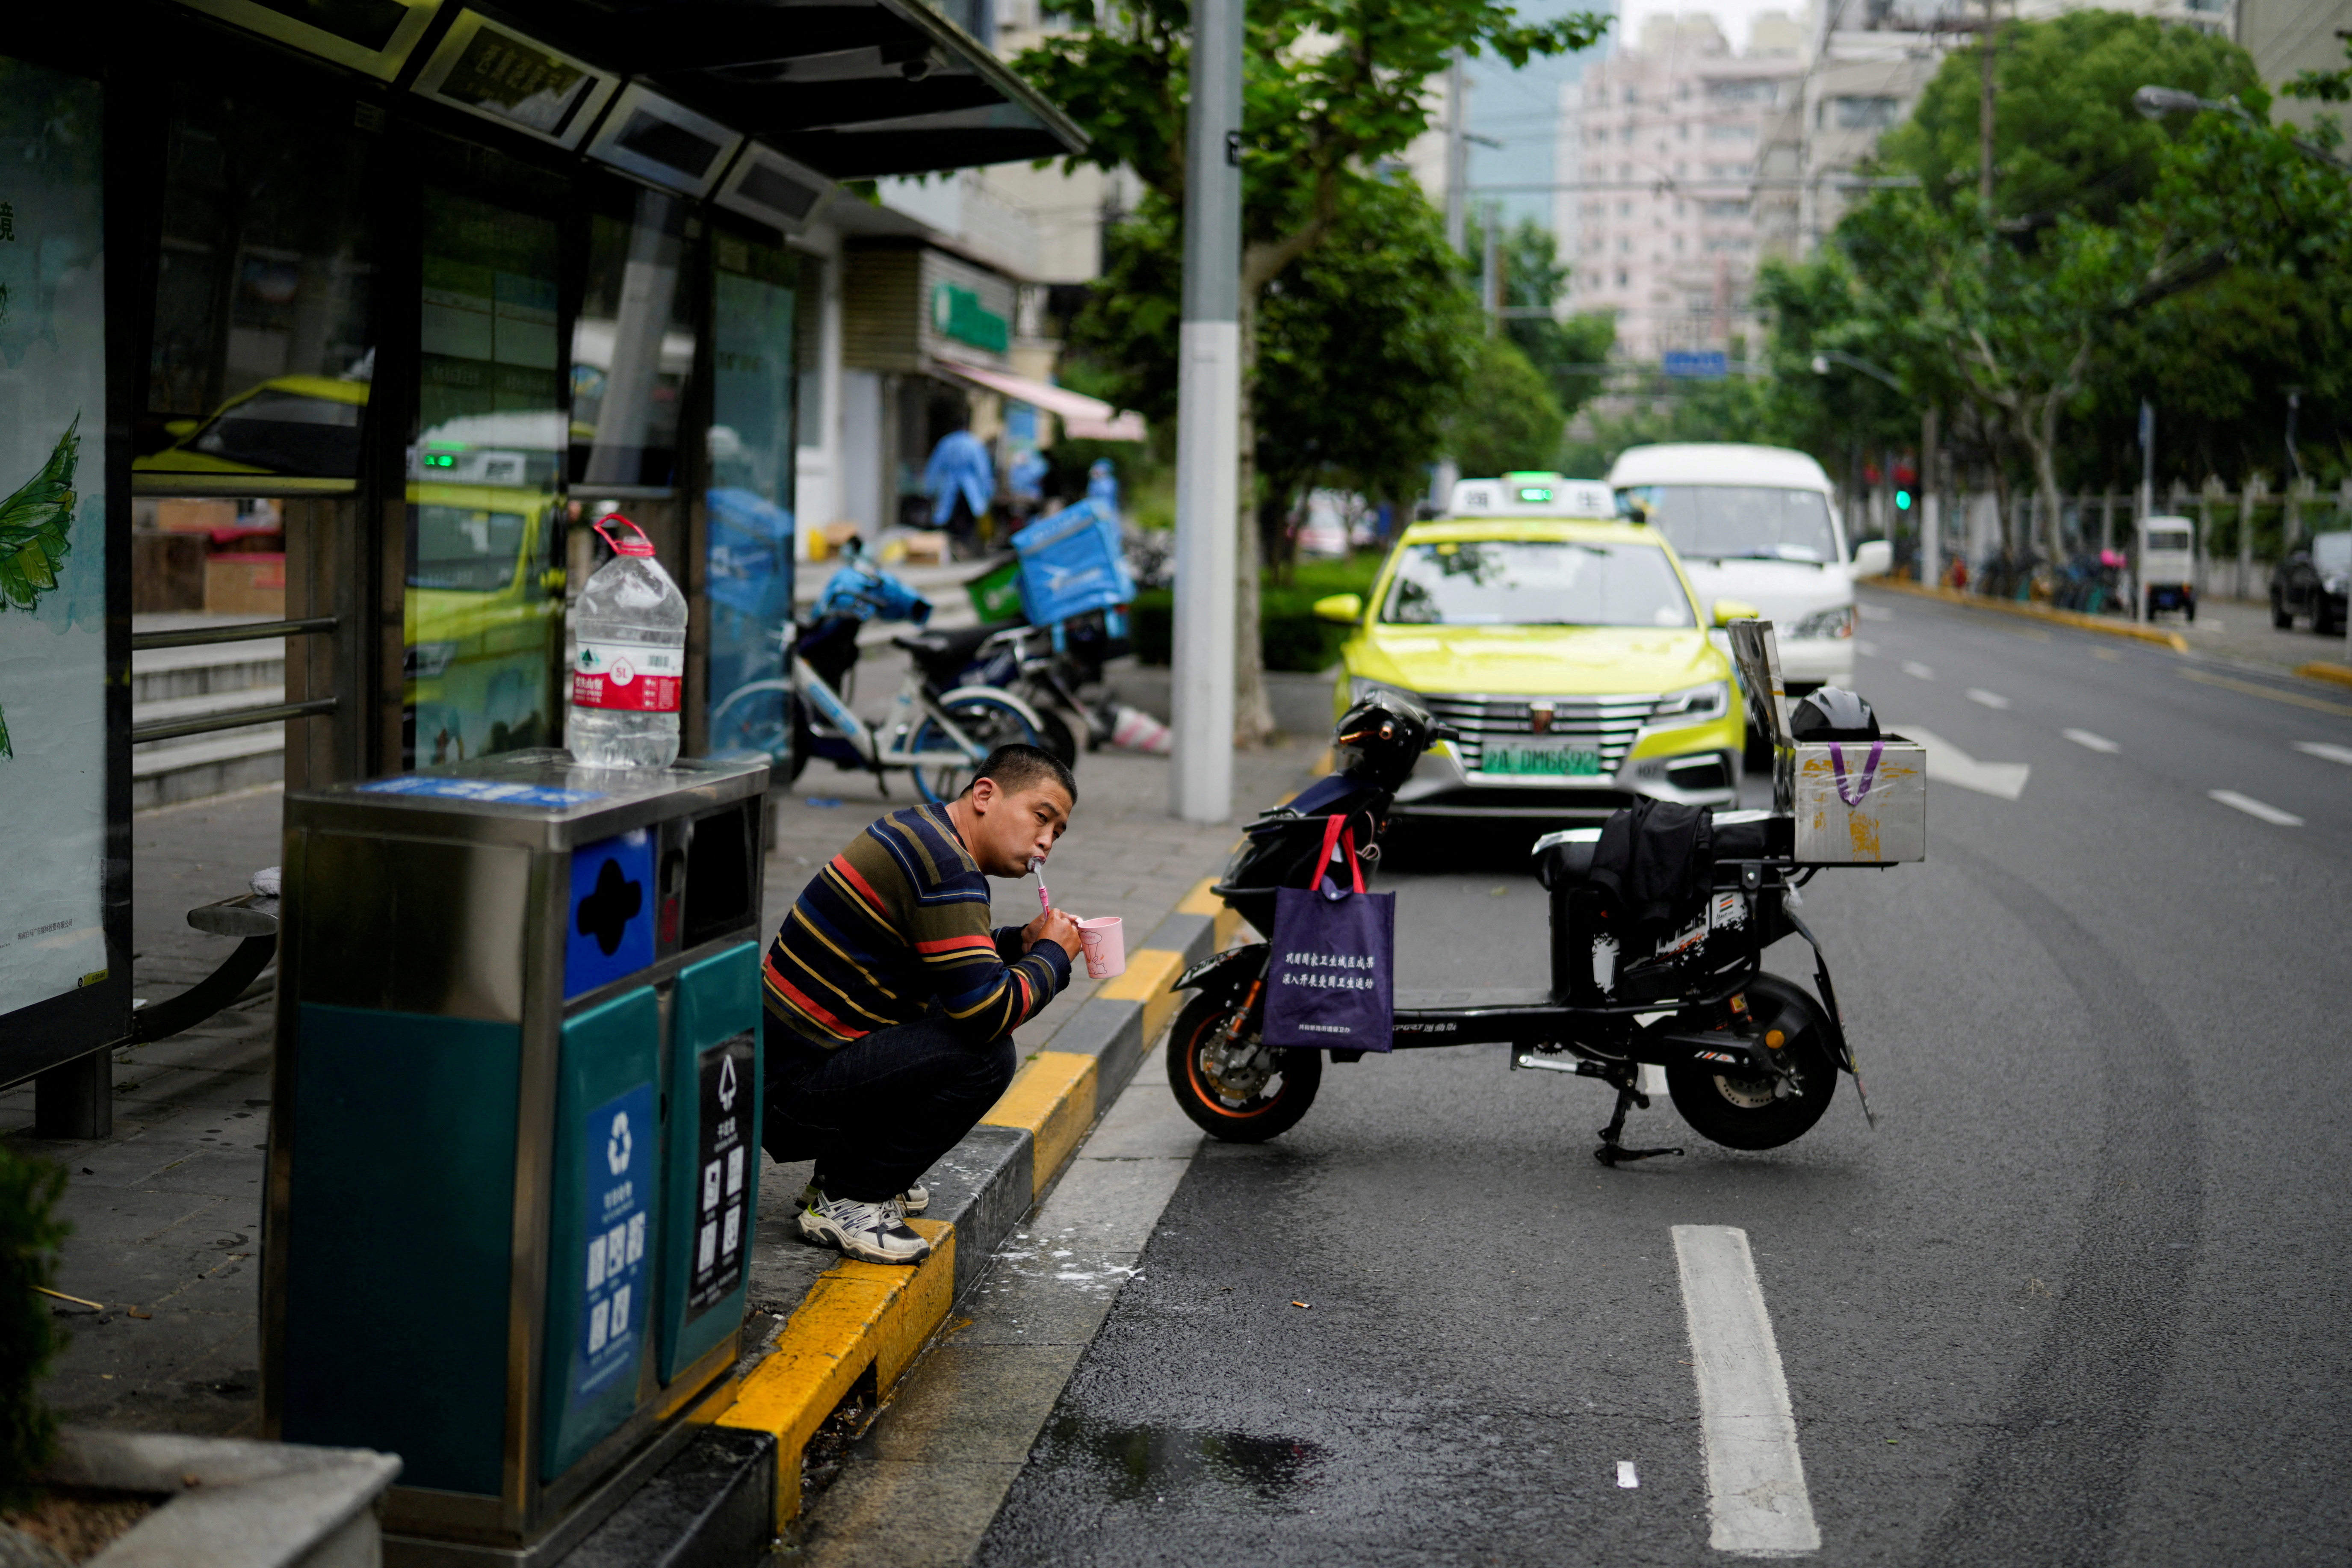 A delivery worker brushes his teeth on a street in Shanghai